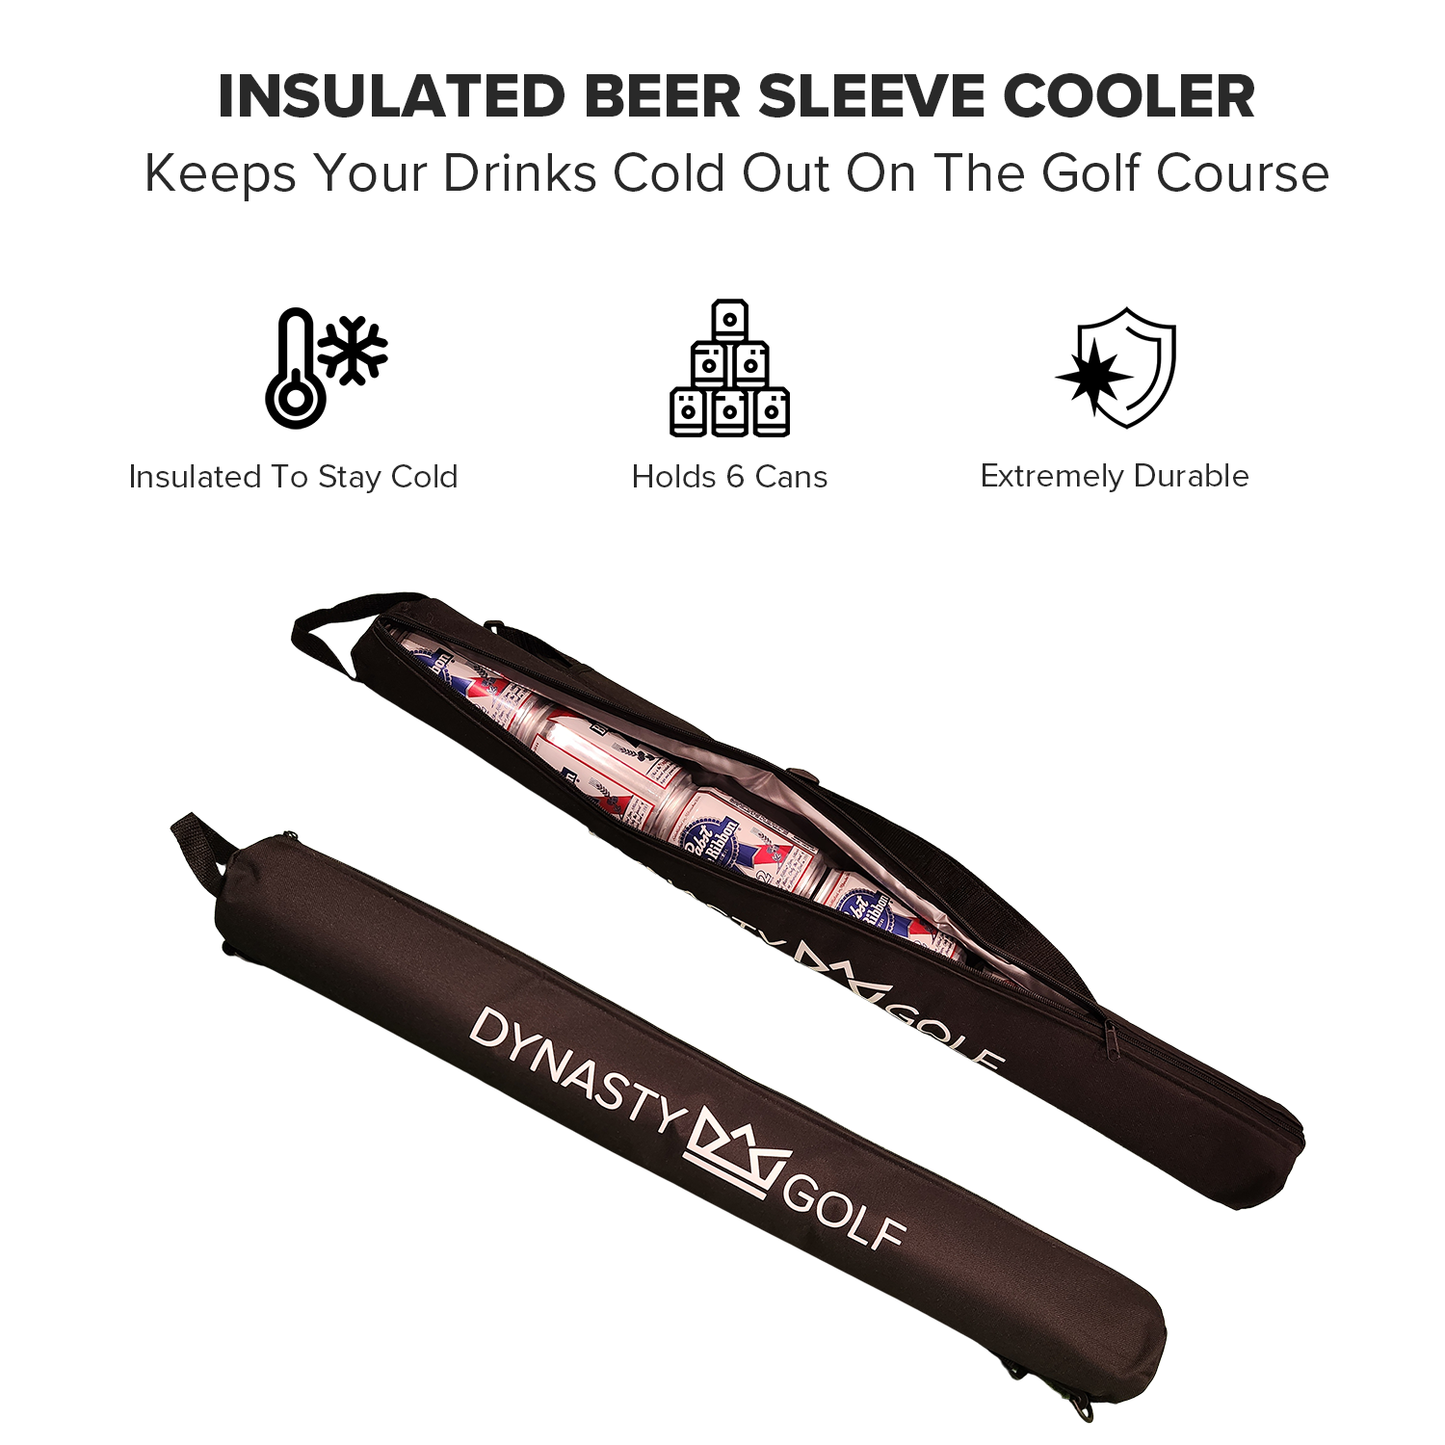 Insulated Golf Beer Sleeve